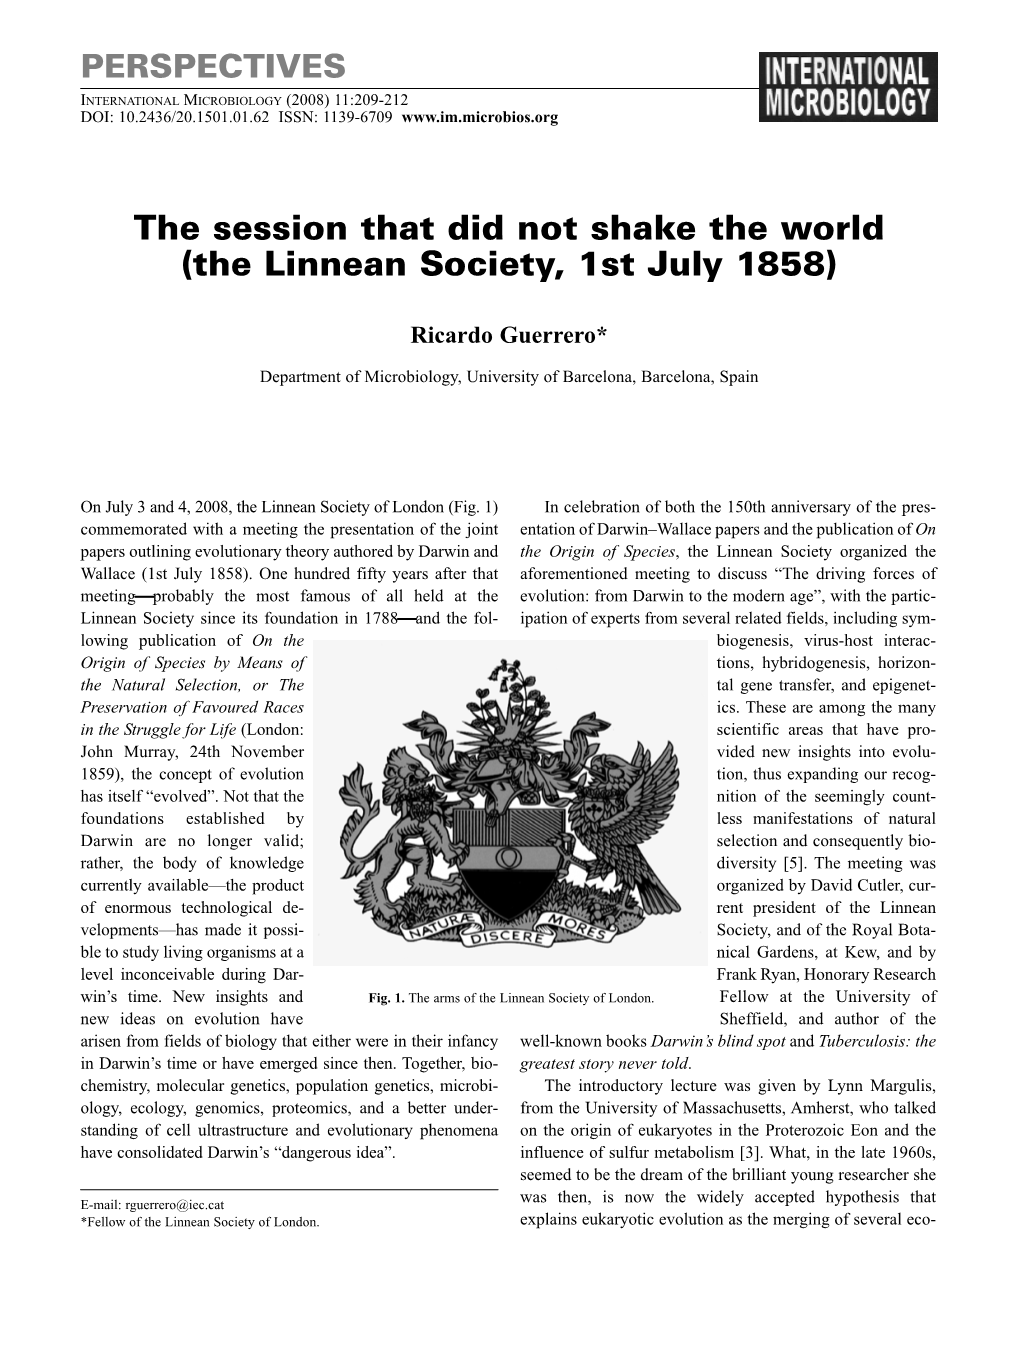 The Session That Did Not Shake the World (The Linnean Society, 1St July 1858)